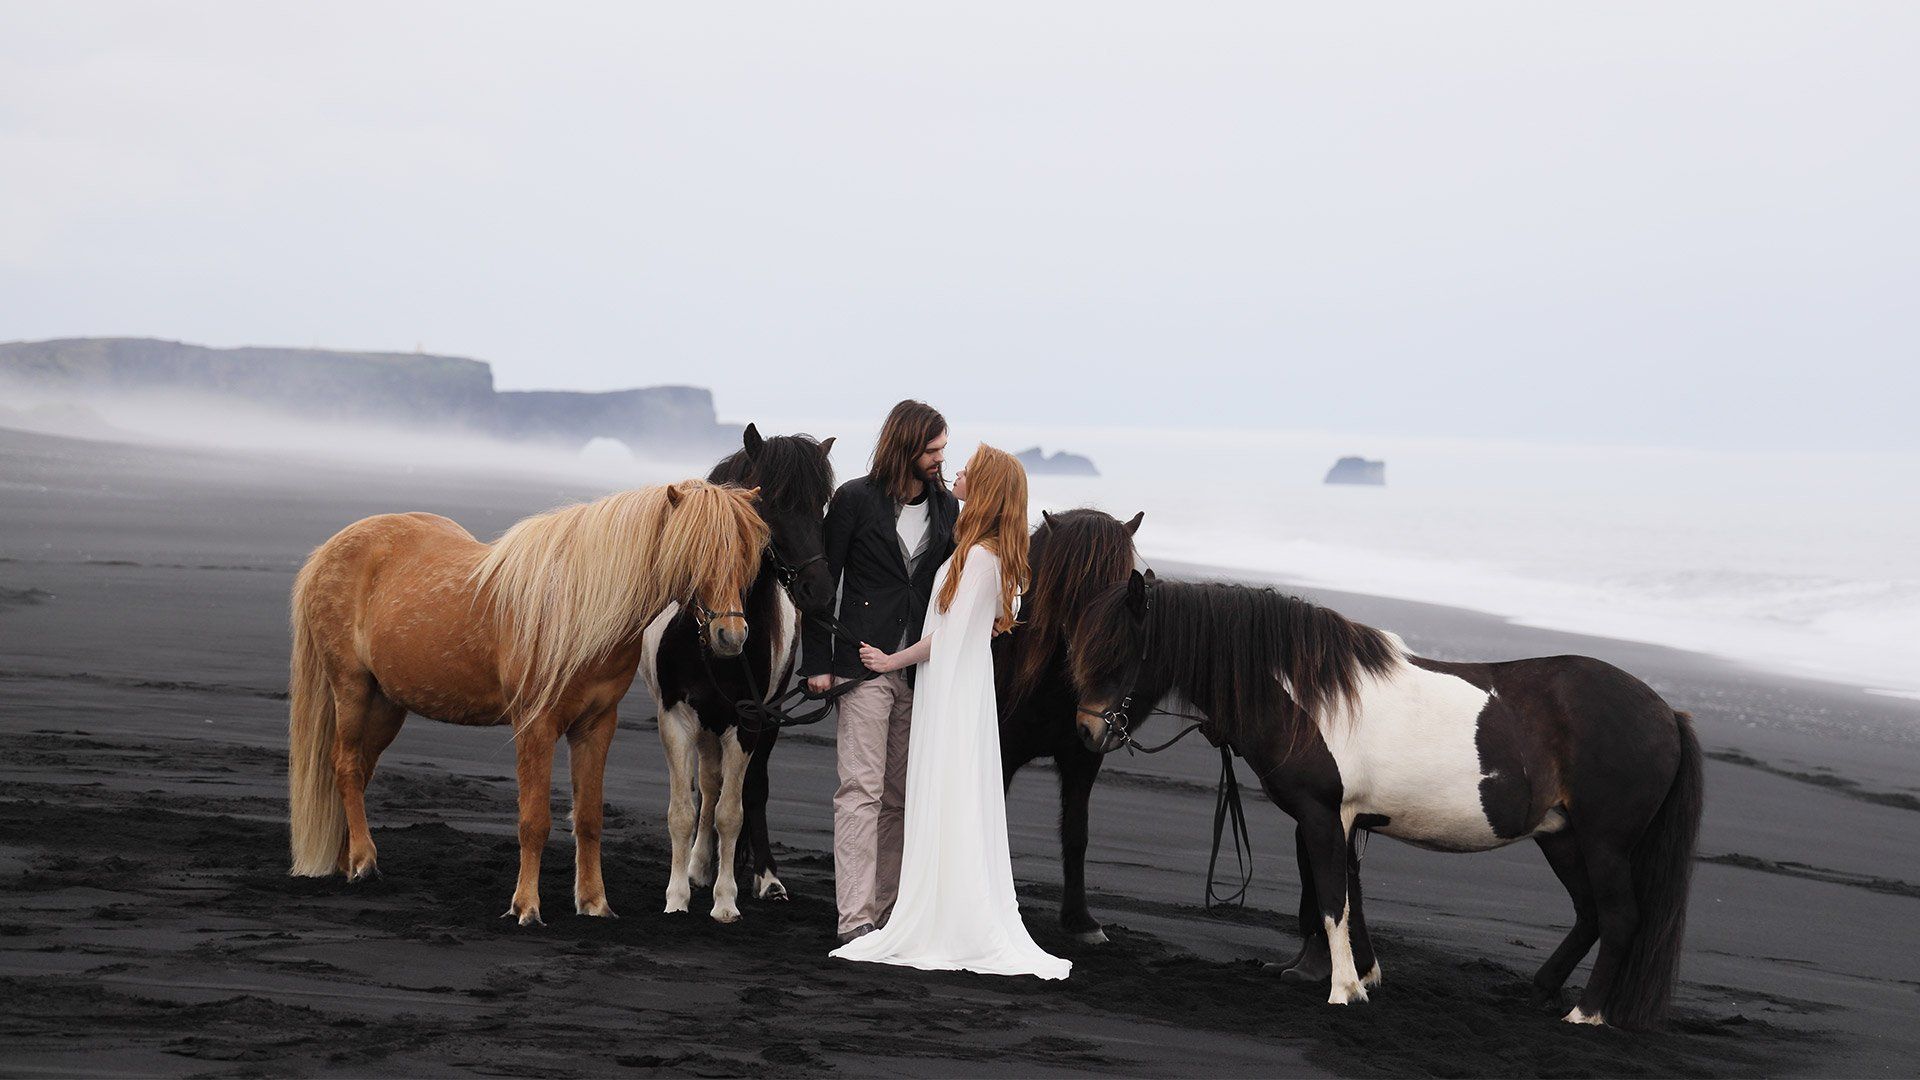 A couple eloping in Iceland on a beach with horses shot on the Canon EOS R and RF 24-105mm F4L IS USM